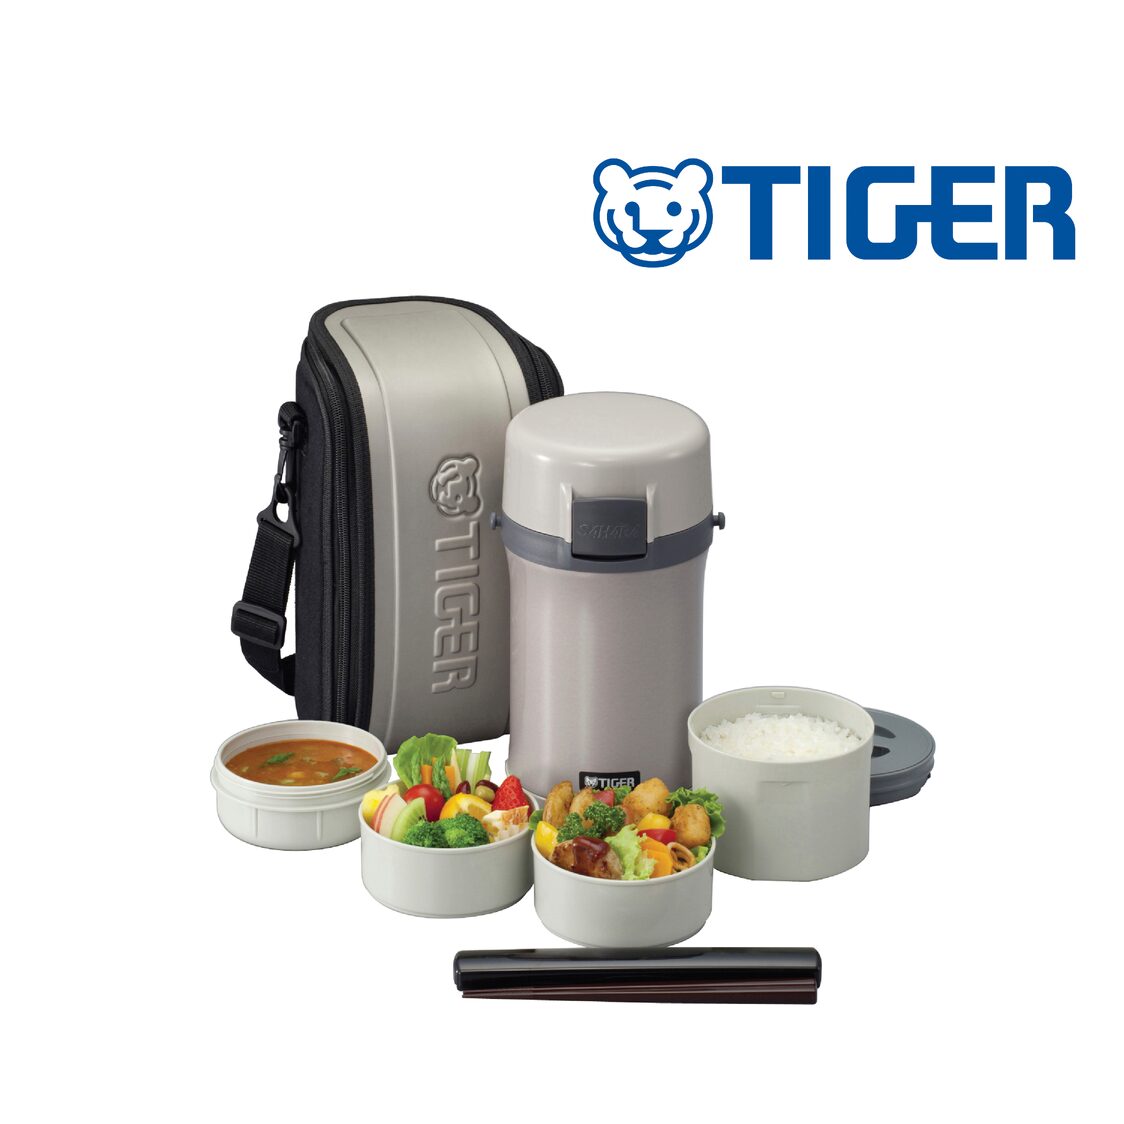 https://media.metro.sg/ProductImages/af07fd88-e469-41f3-bd7c-369a12394328/1/std/tiger-vacuum-insulated-double-stainless-steel-lunch-box-with-bag-4-cups-lwu-f200-230929100304.jpg